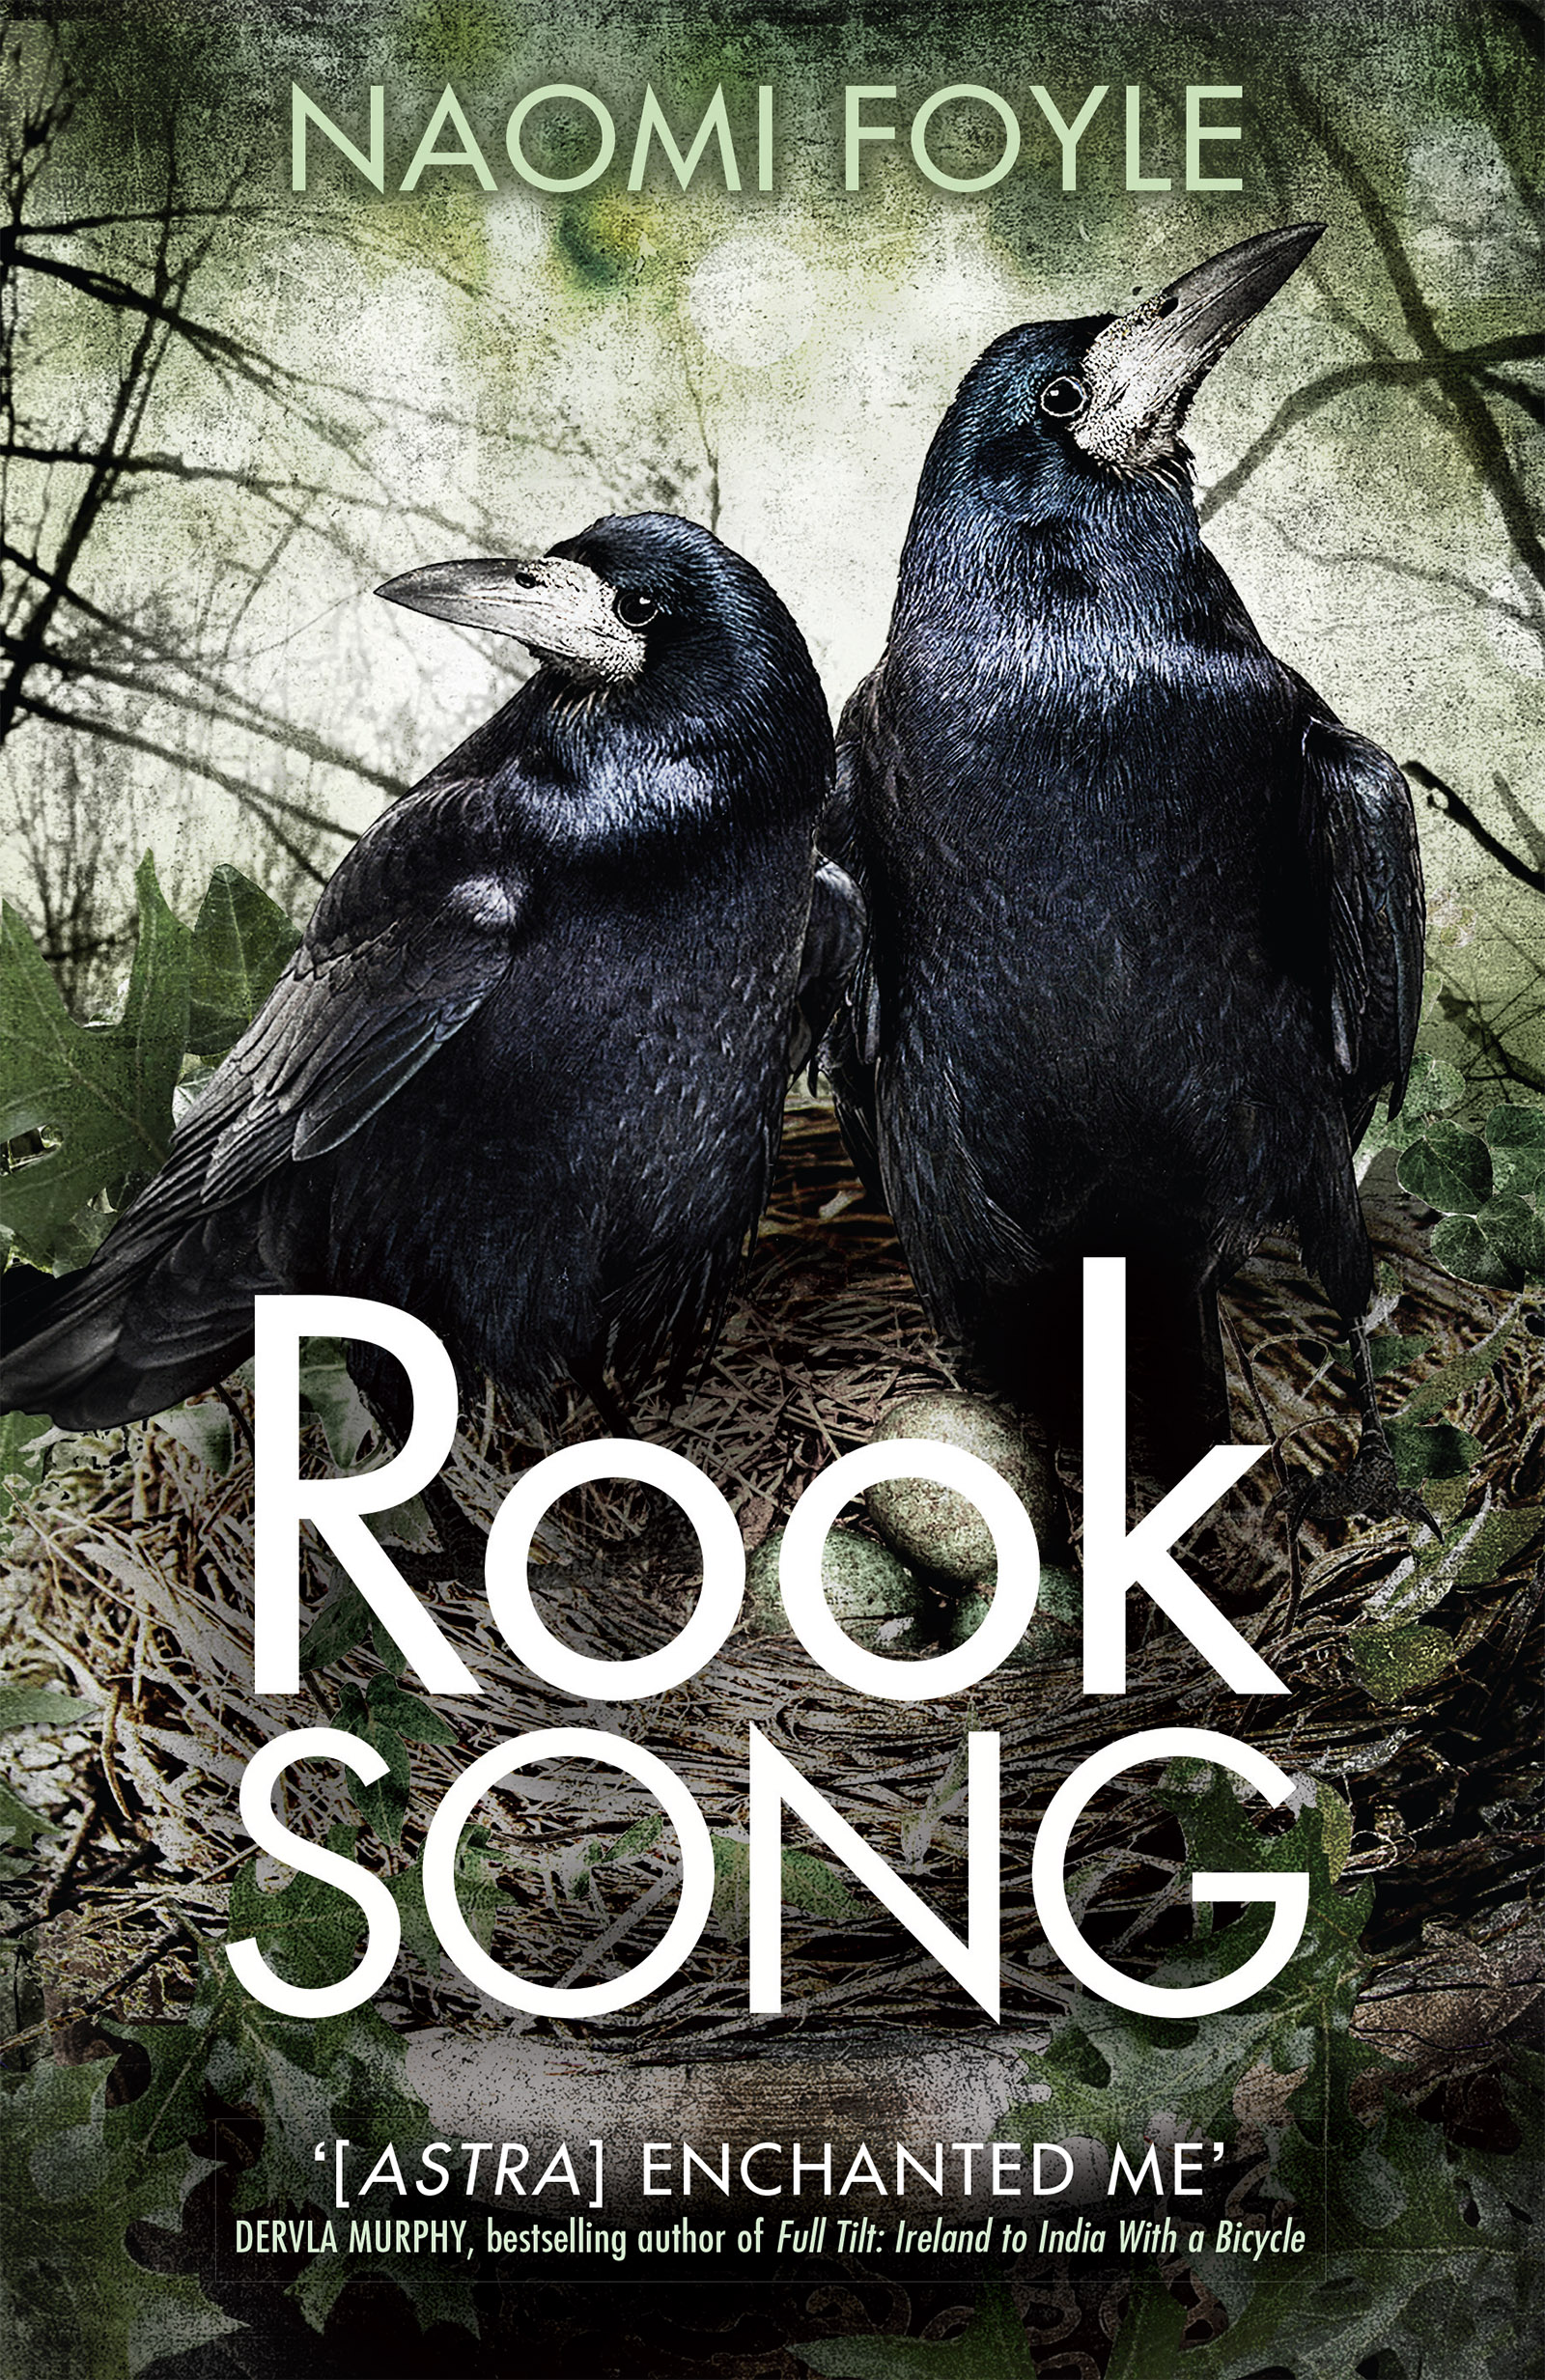 The cover image of Rook Song: The Gaia Chronicles Book 2. An illustration of two rooks in a nest. - ©Jo Fletcher Books/Andy Vella